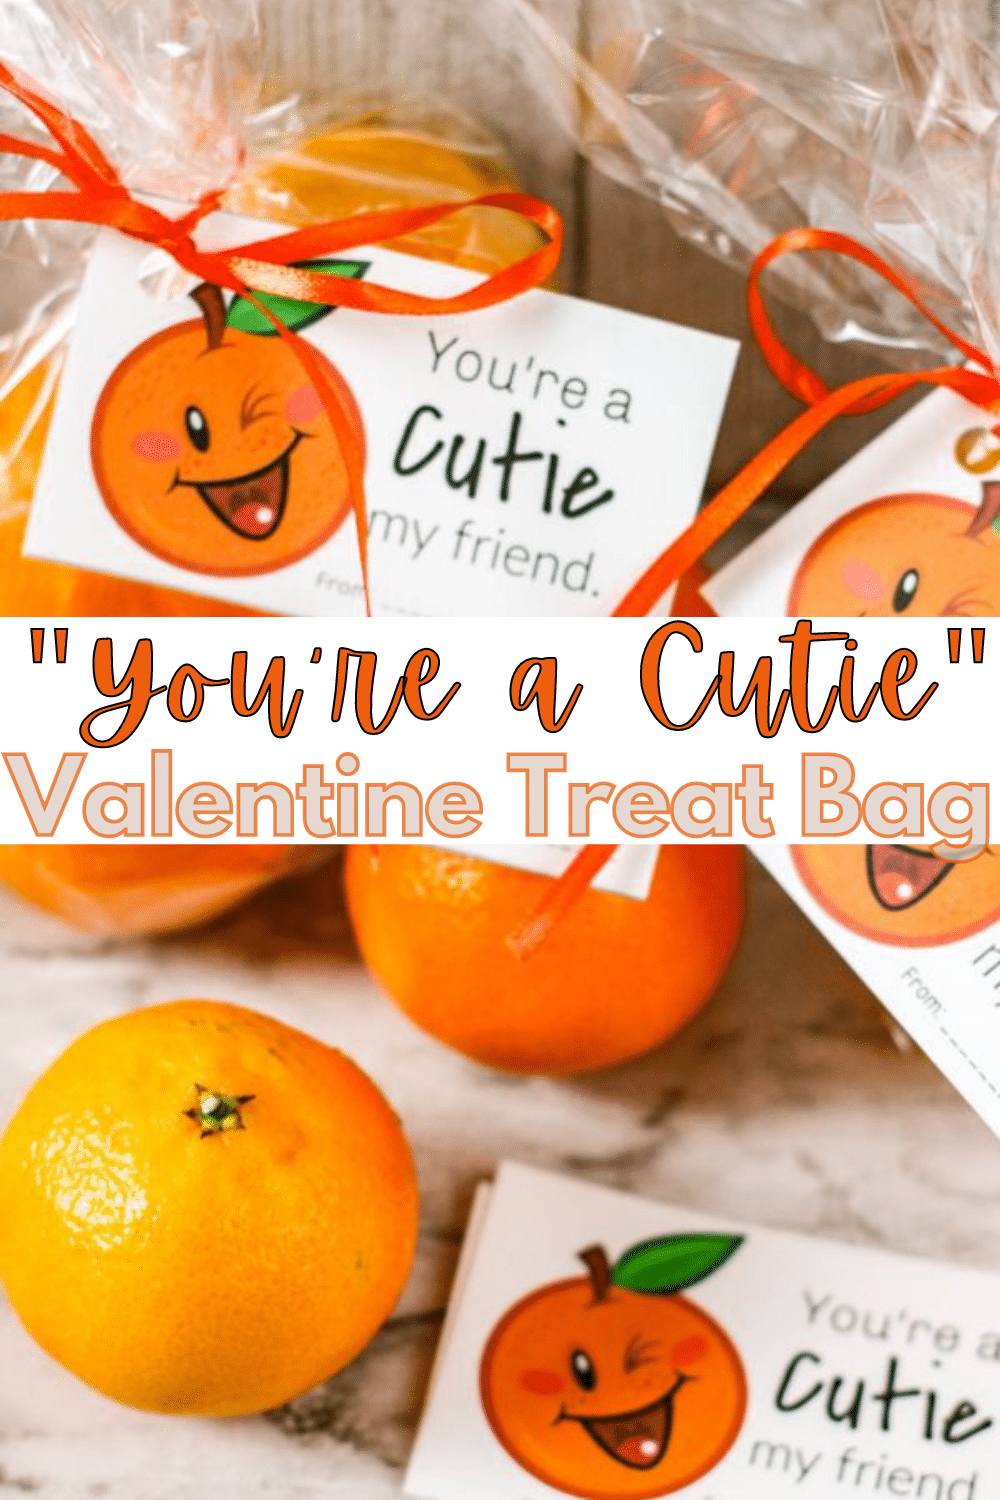 These cutie valentine treat bags are adorable and a great non-candy alternative for Valentine's Day. Instructions include a free "You're a Cutie" printable! #homemade #valentine #noncandy via @wondermomwannab